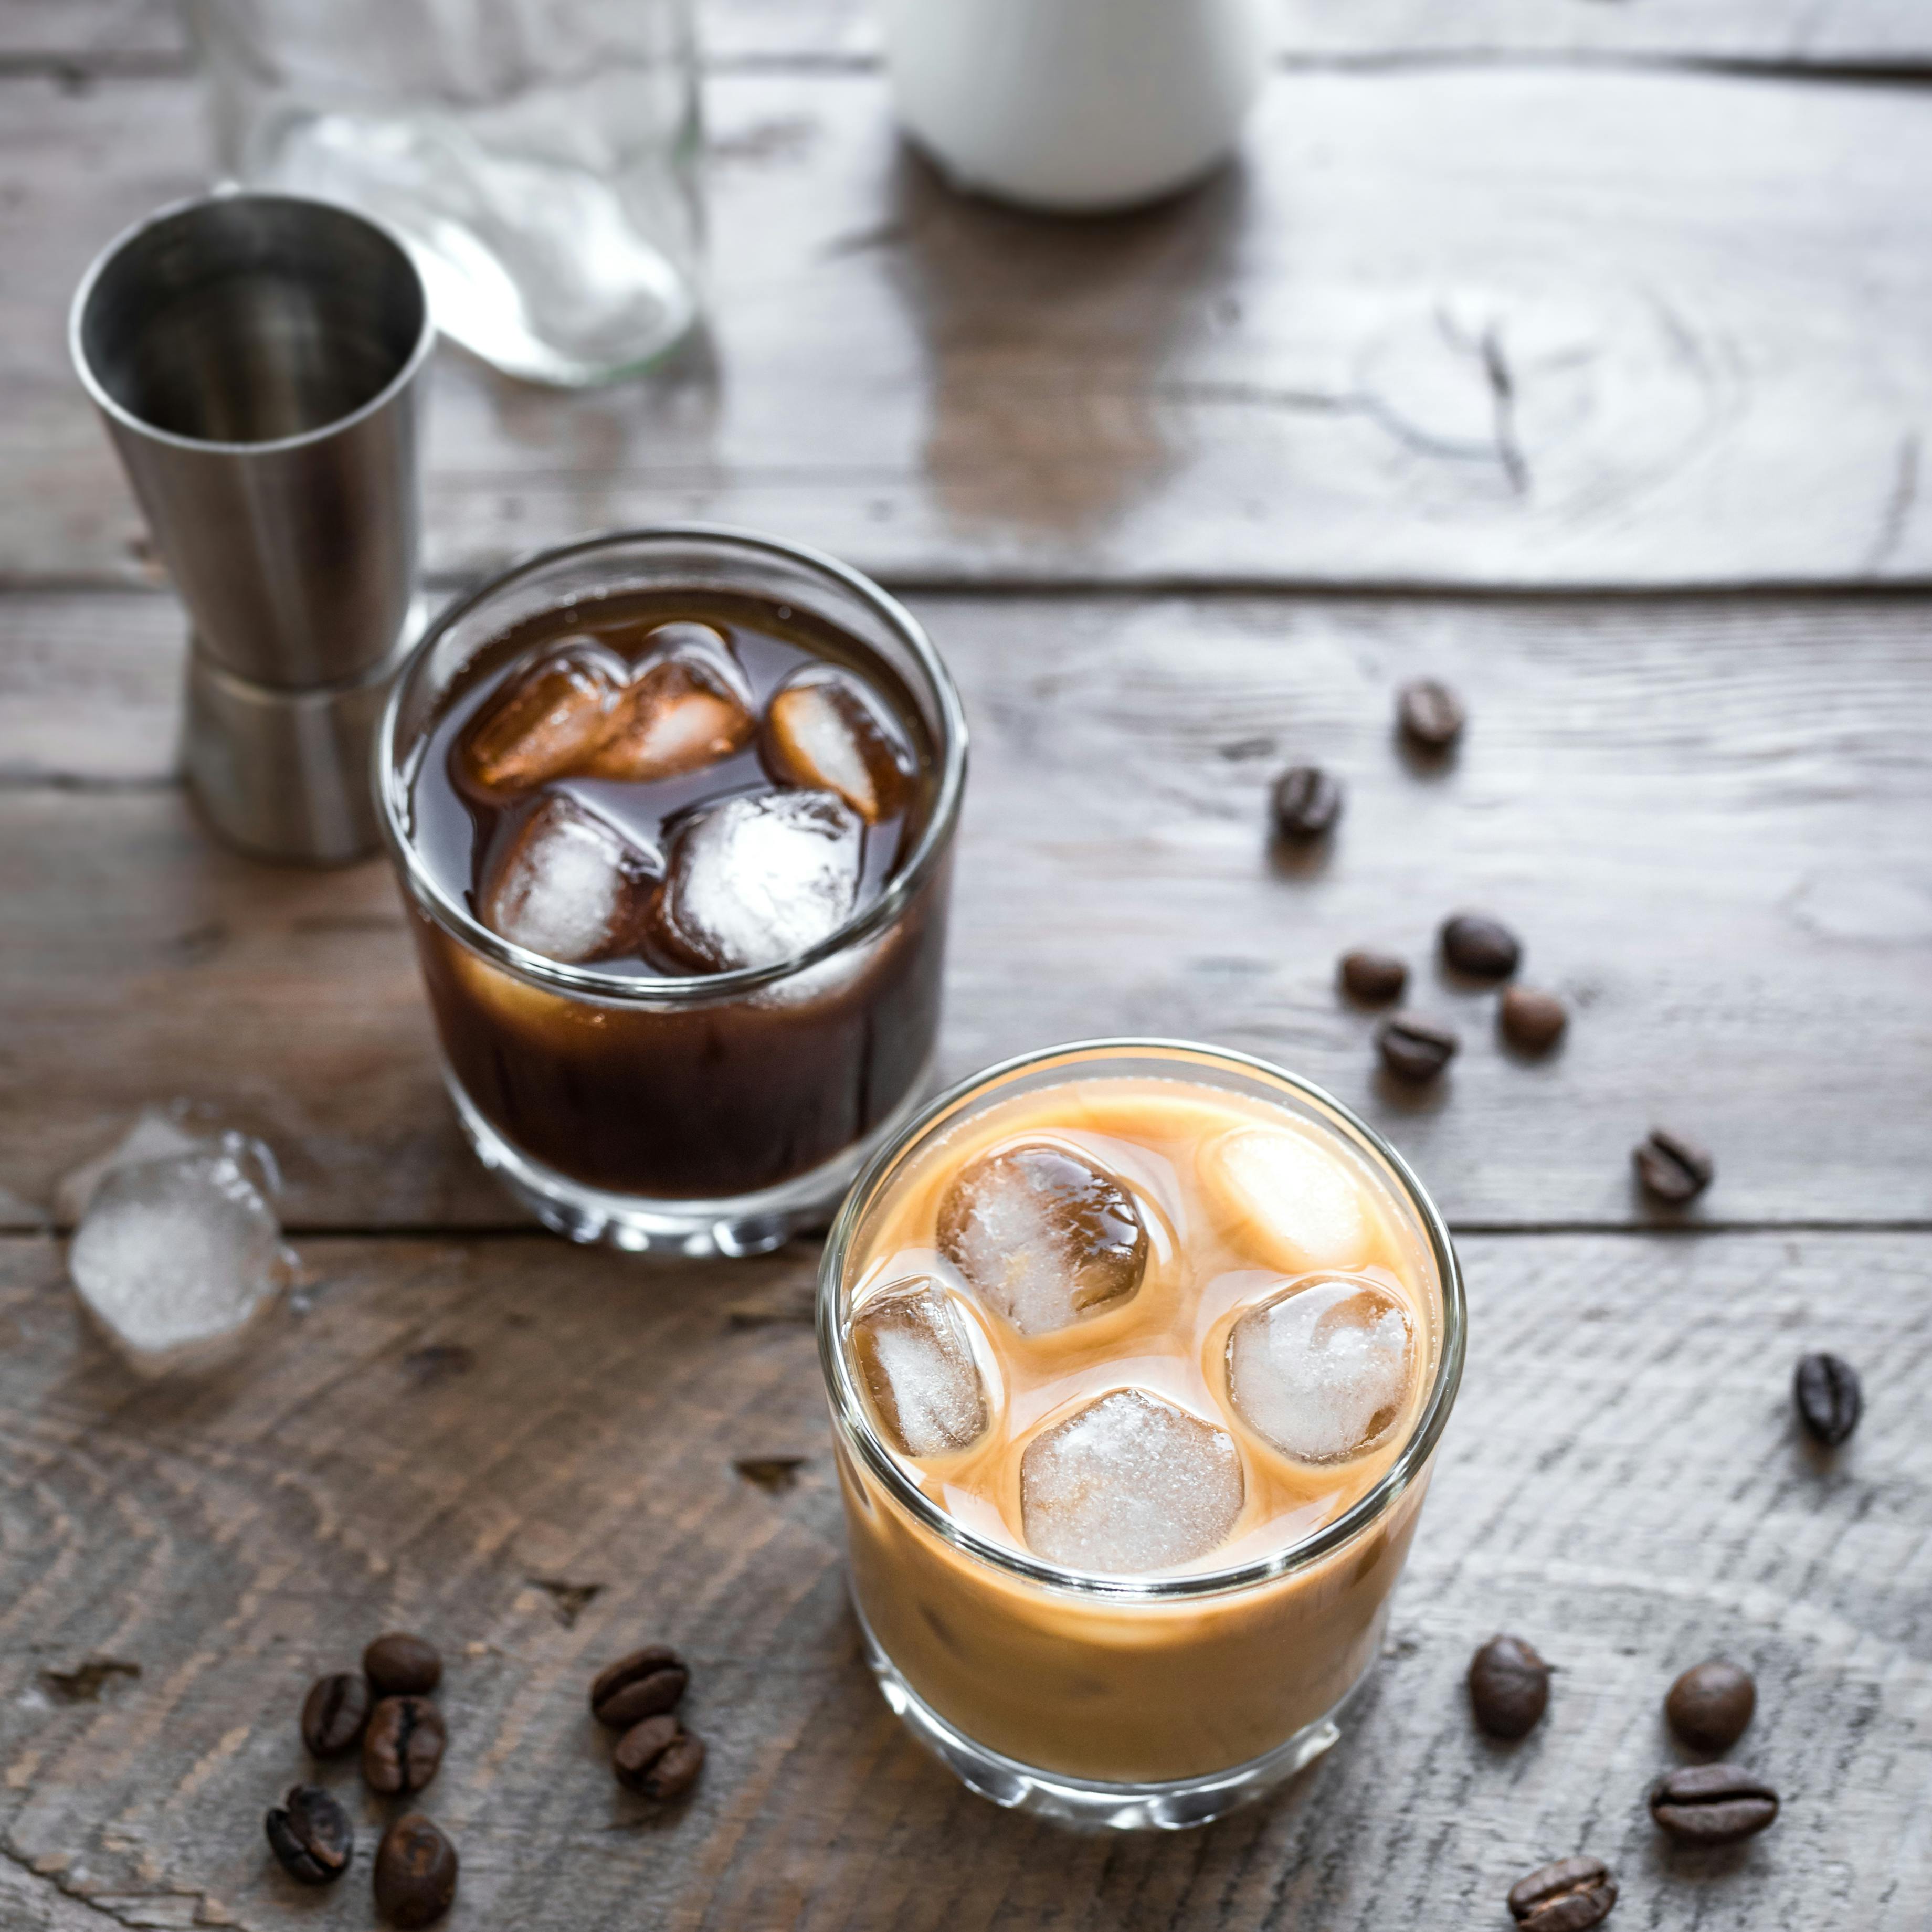 Black and White Russian Cocktails with Vodka, Coffee Liquor and Cream. Homemade iced Alcohol Boozy Black Russian and White Russian drink with coffee beans on wooden background, copy space.